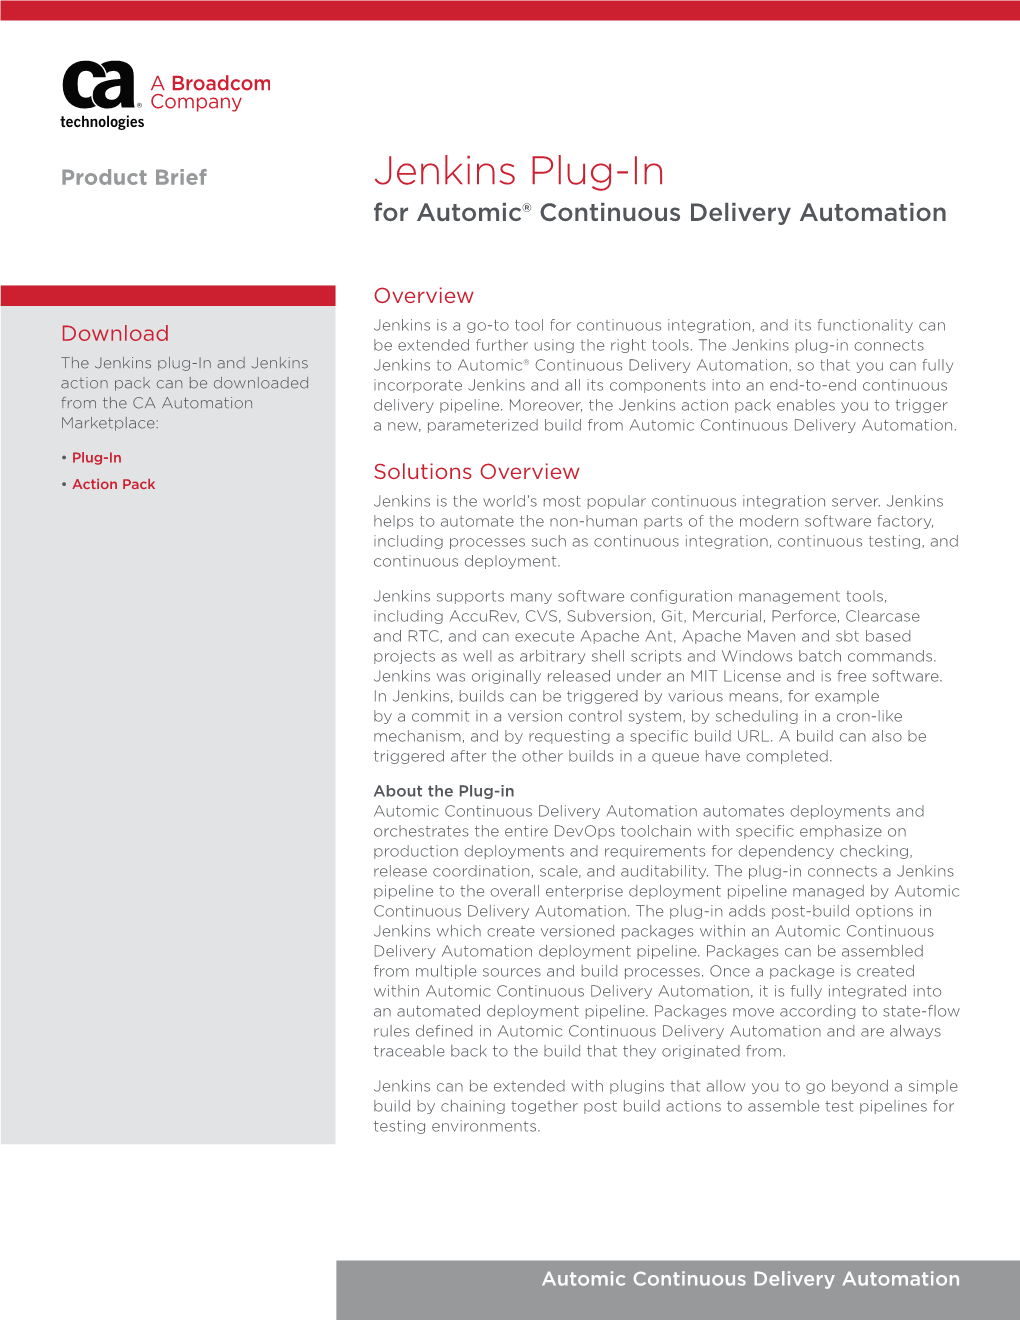 Jenkins Plug-In for Automic Continuous Delivery Automation